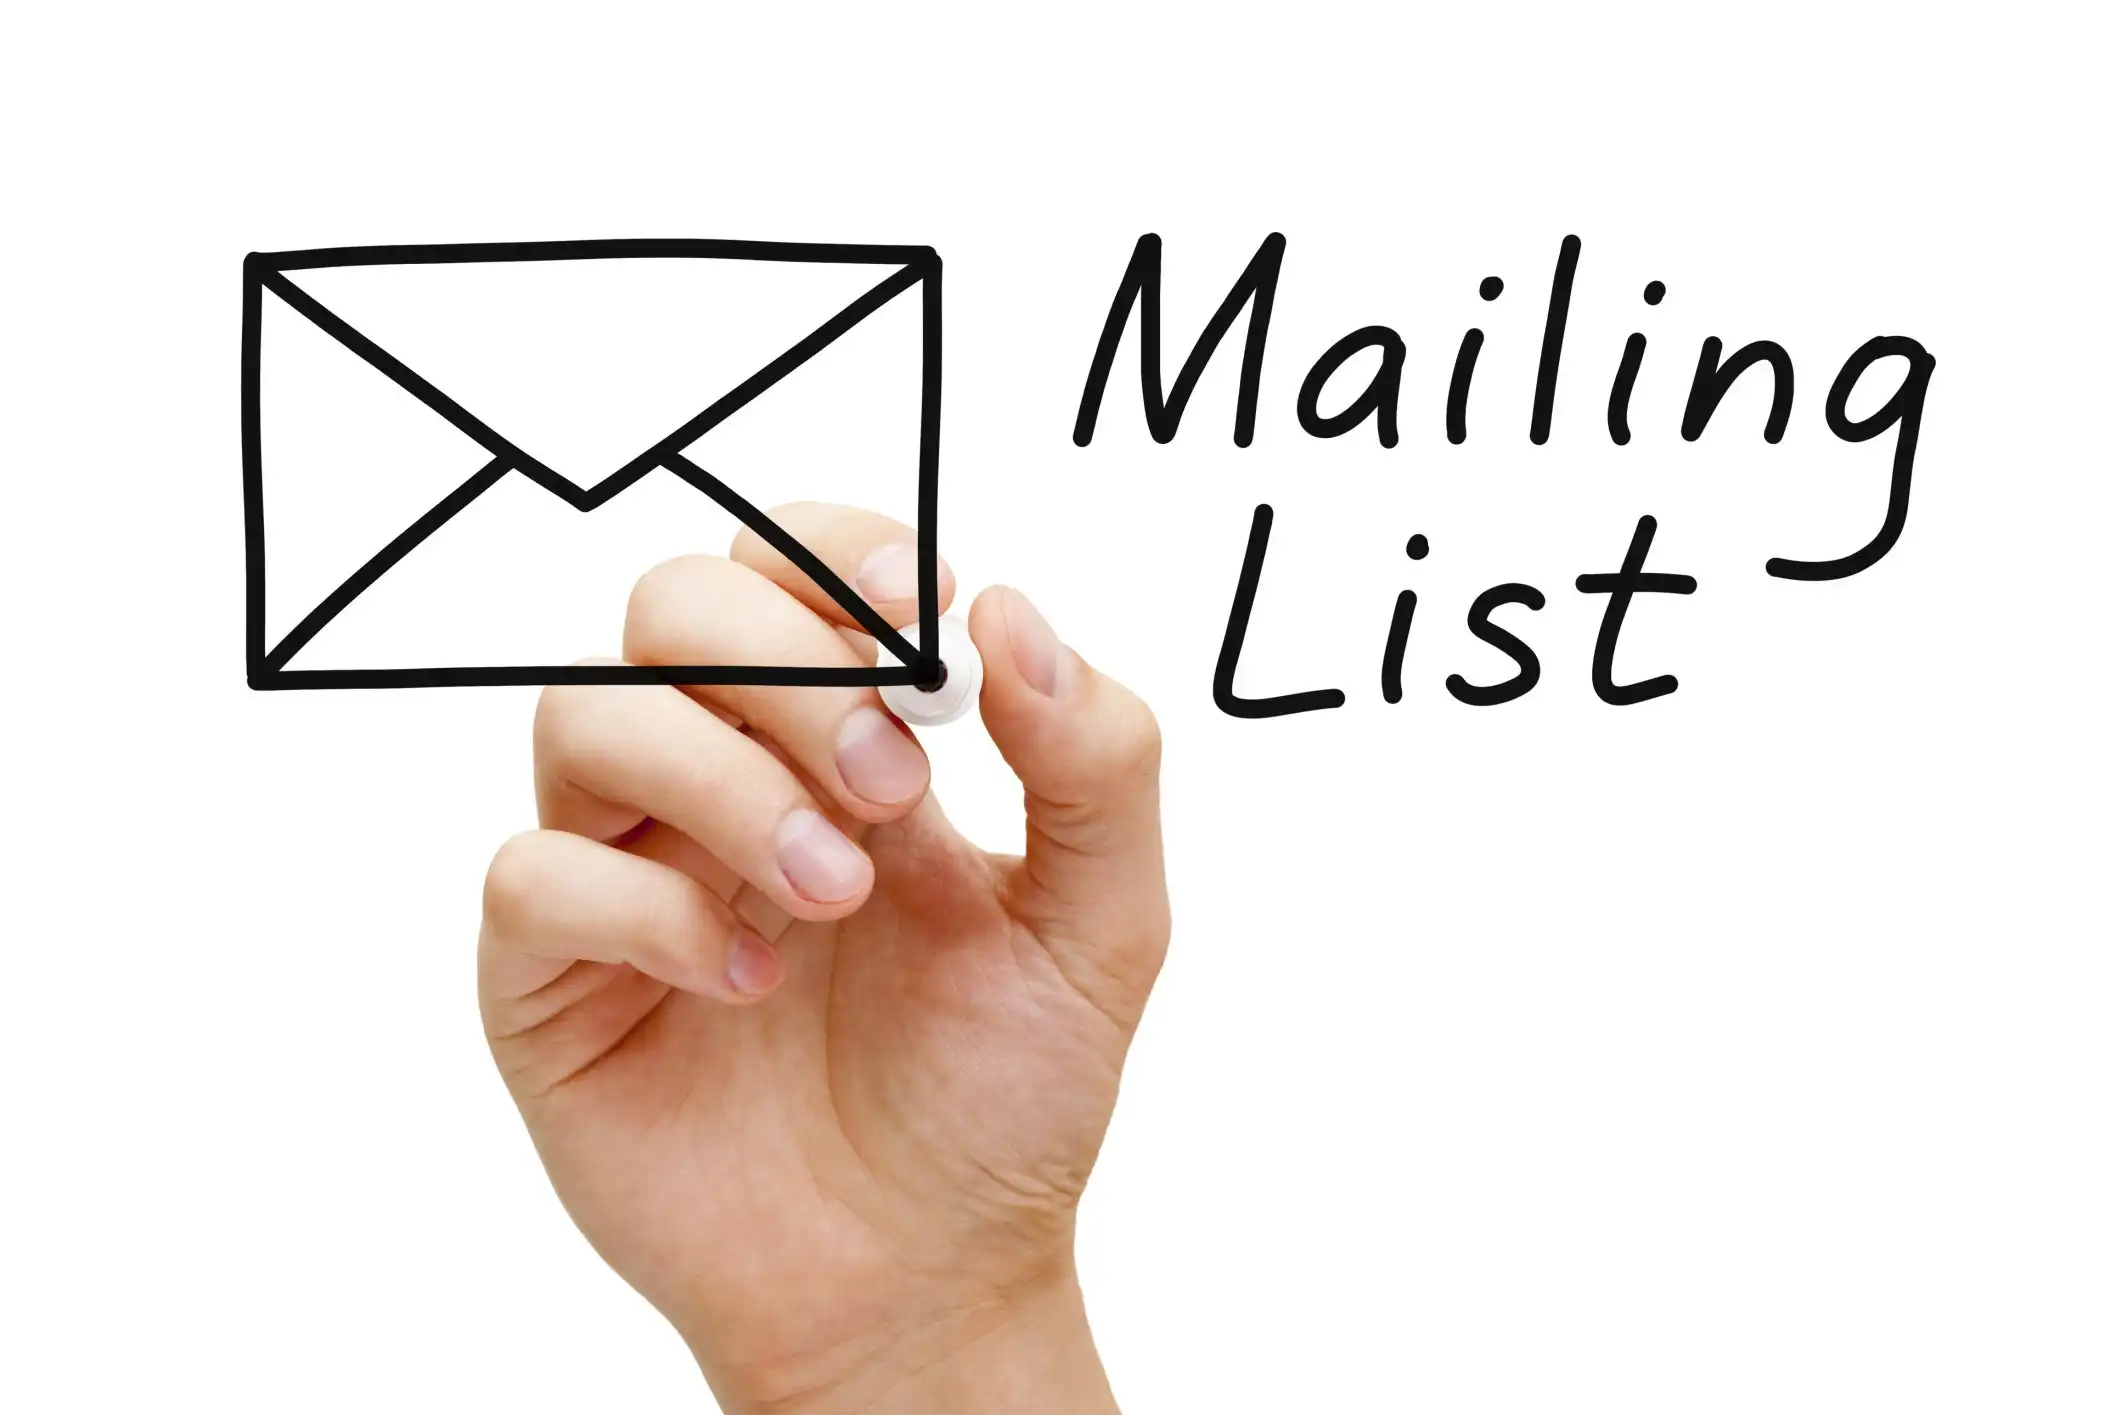 5 tips for Your First Email List